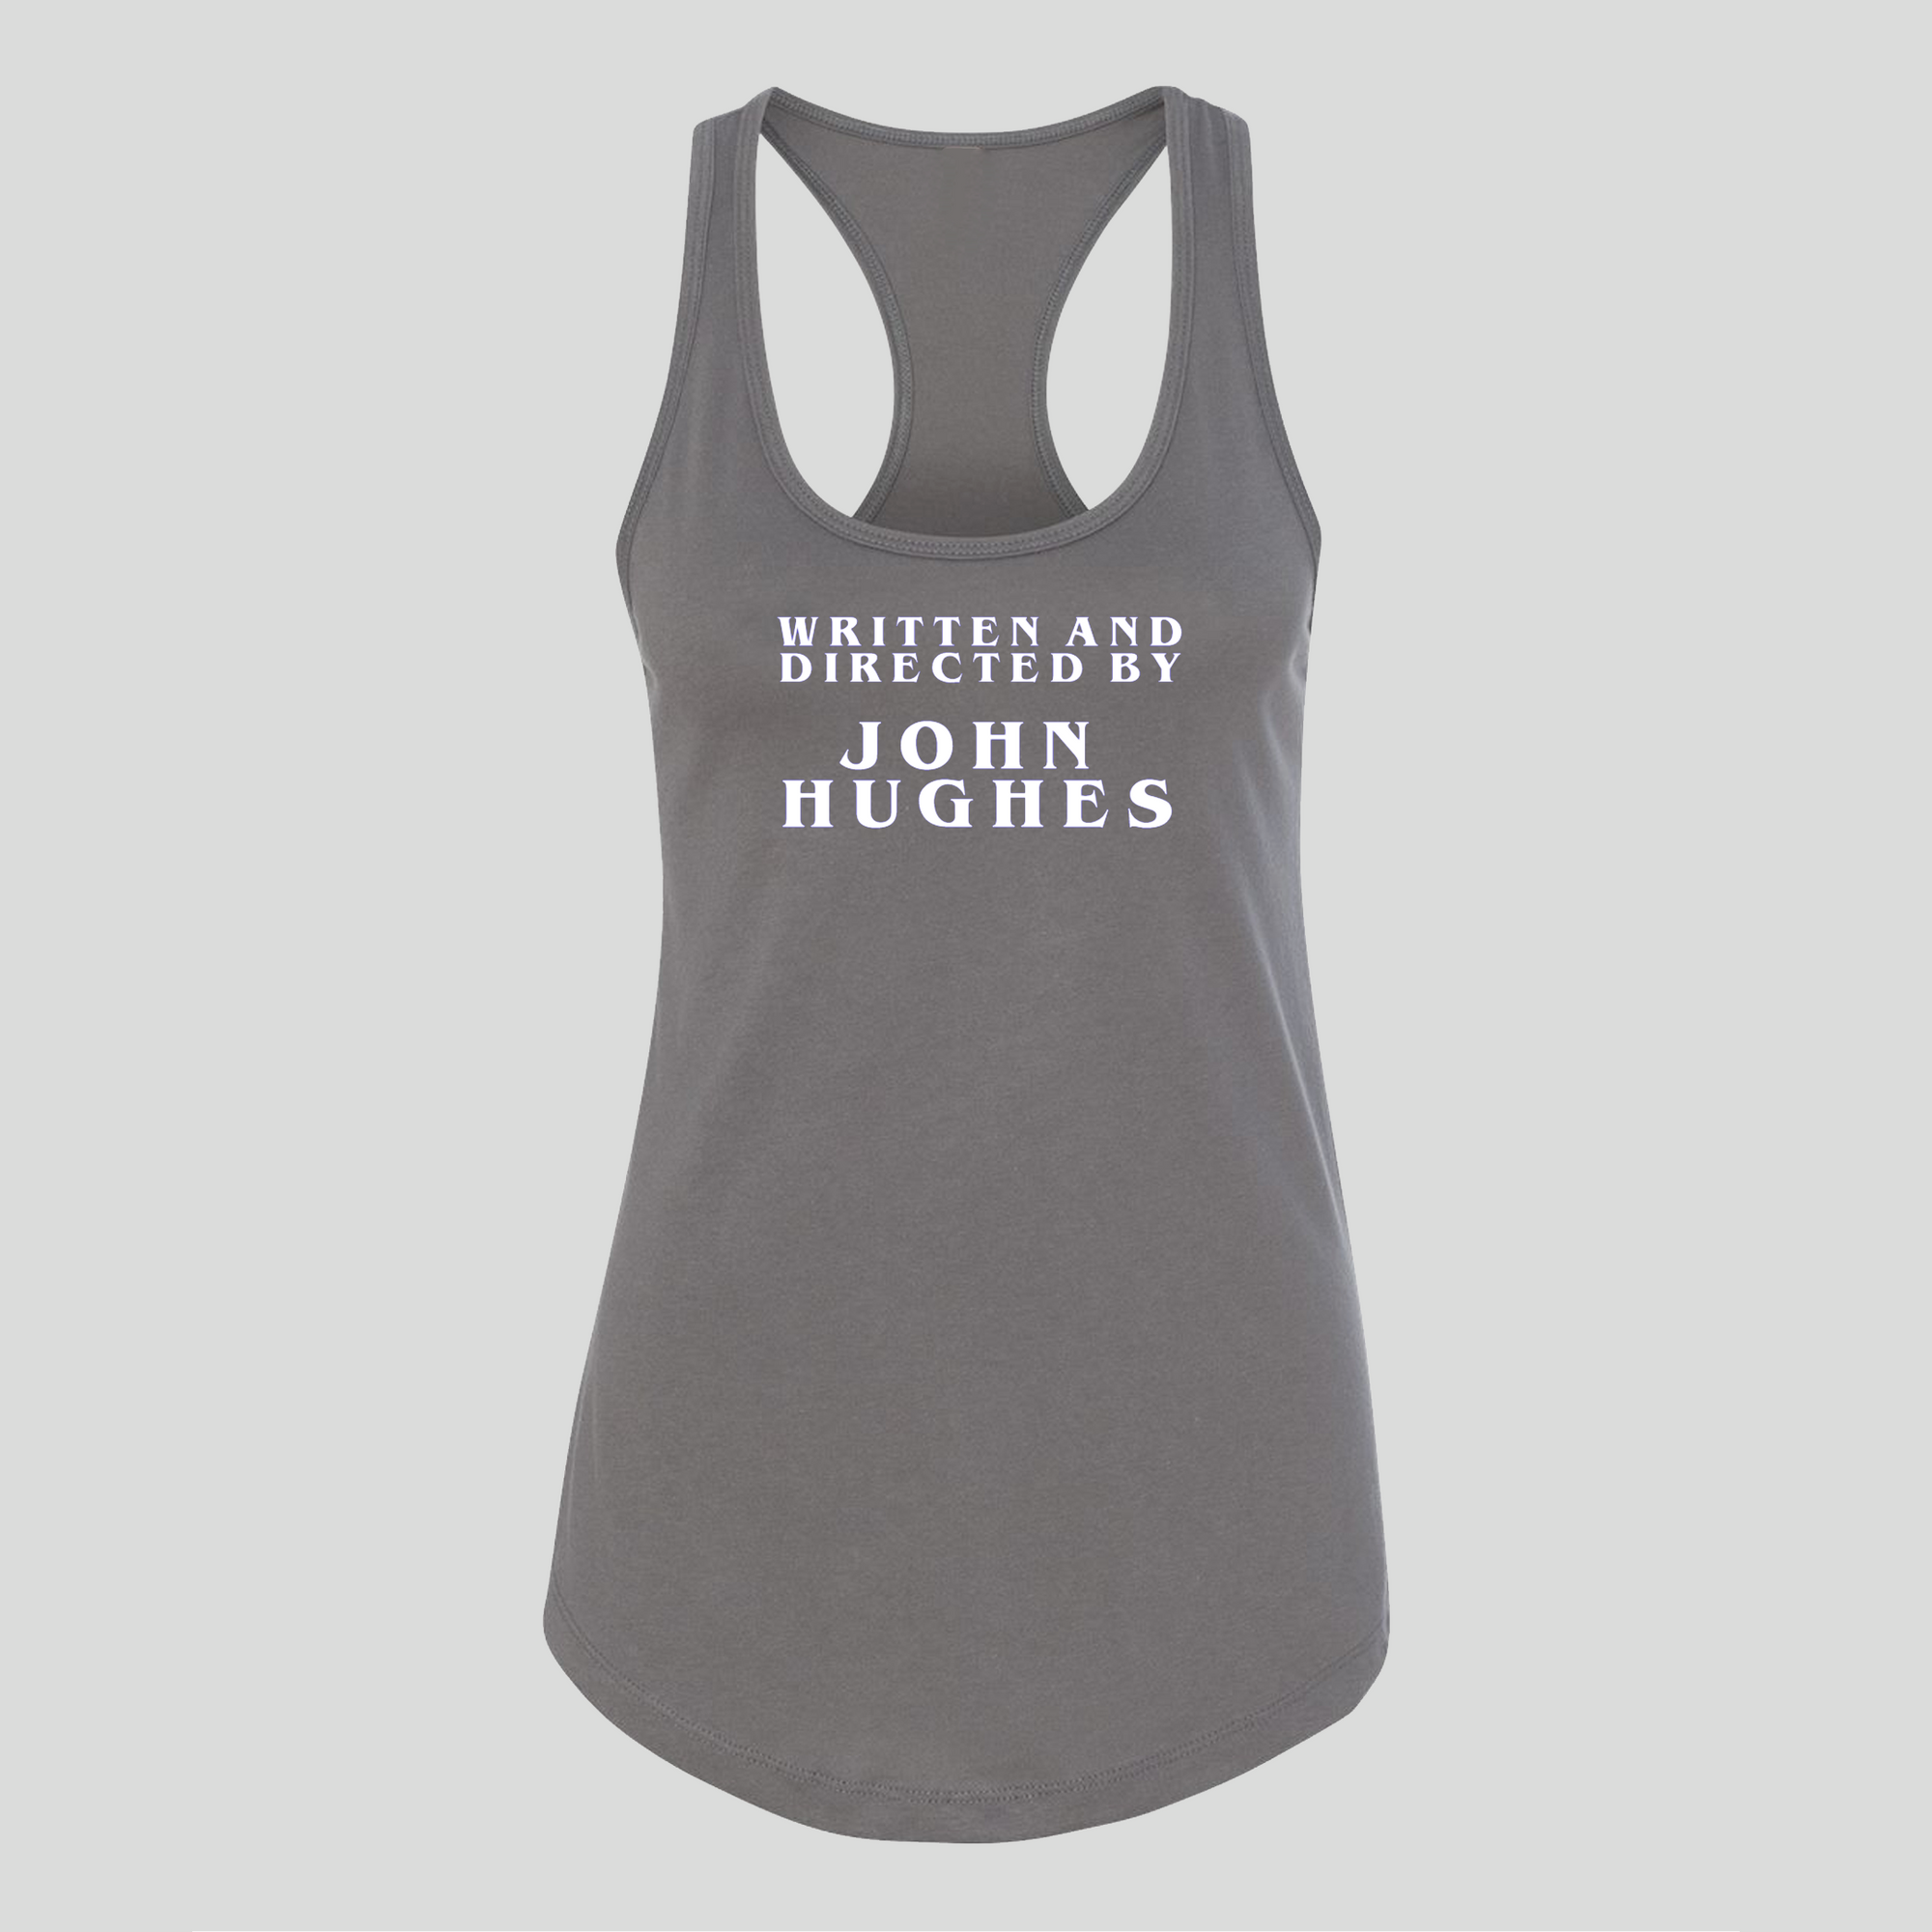 Written and Directed by John Hughes Racerback Tank